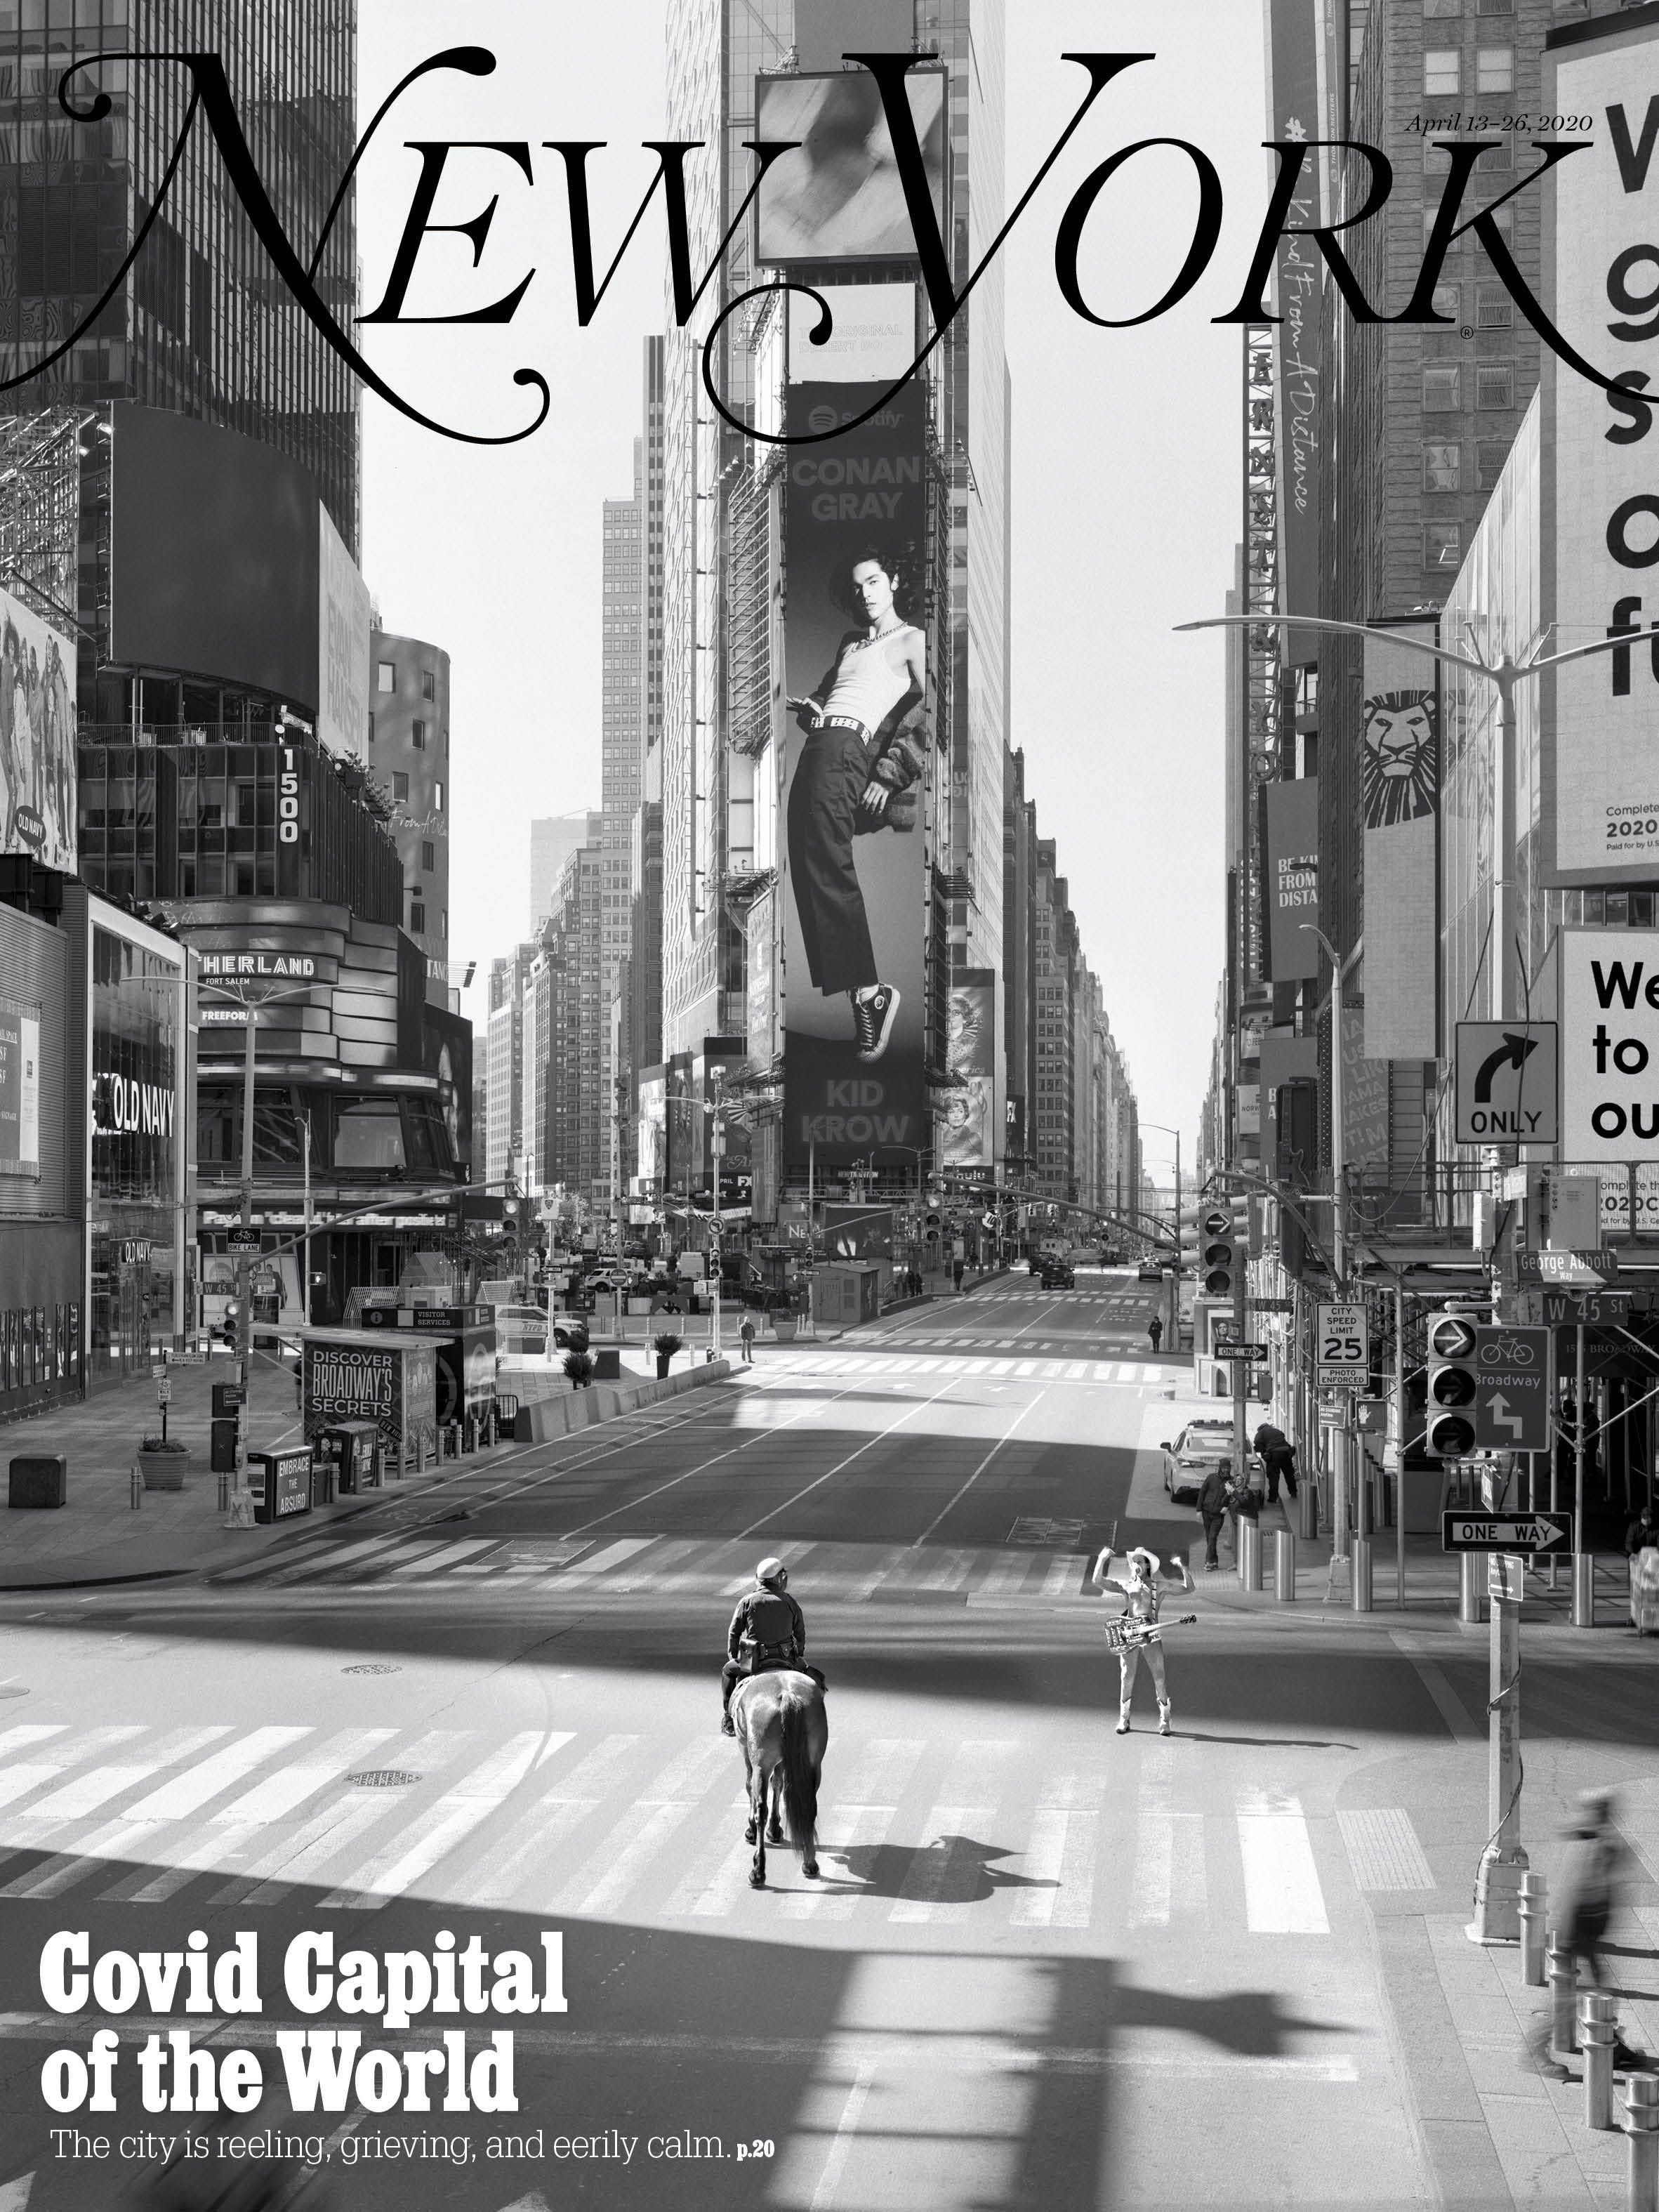 On the Cover of New York Magazine: New York City, 4 Weeks In